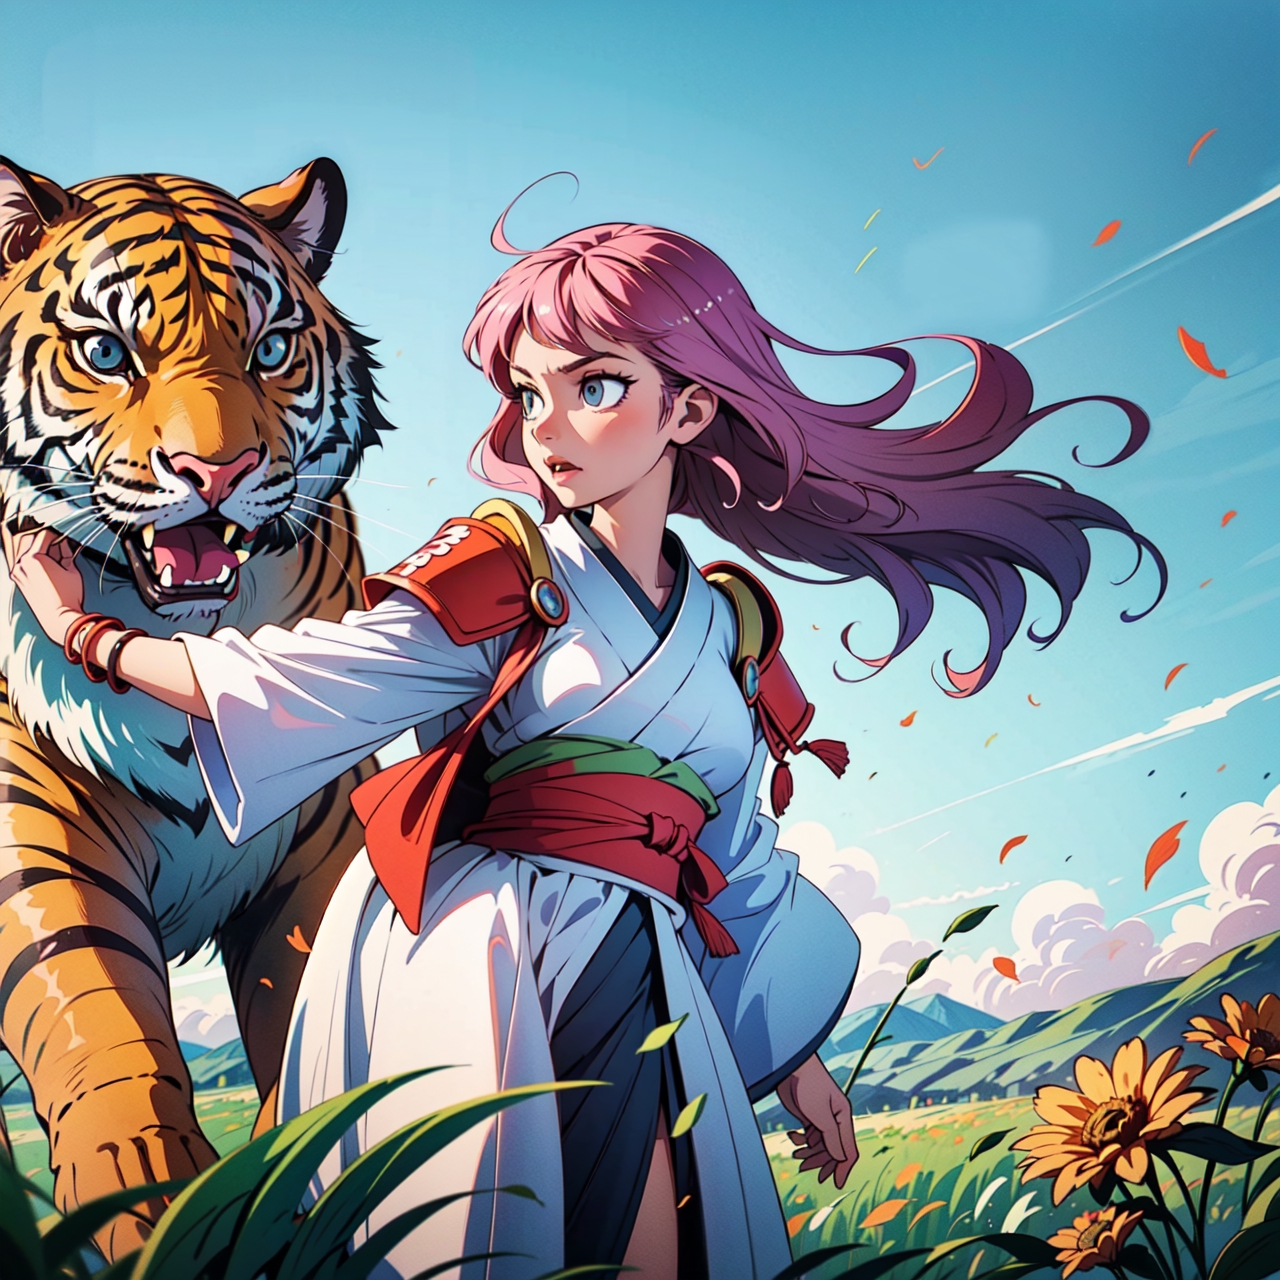 A giant orange and blue striped tiger in an anime style - AI Generated  Artwork - NightCafe Creator